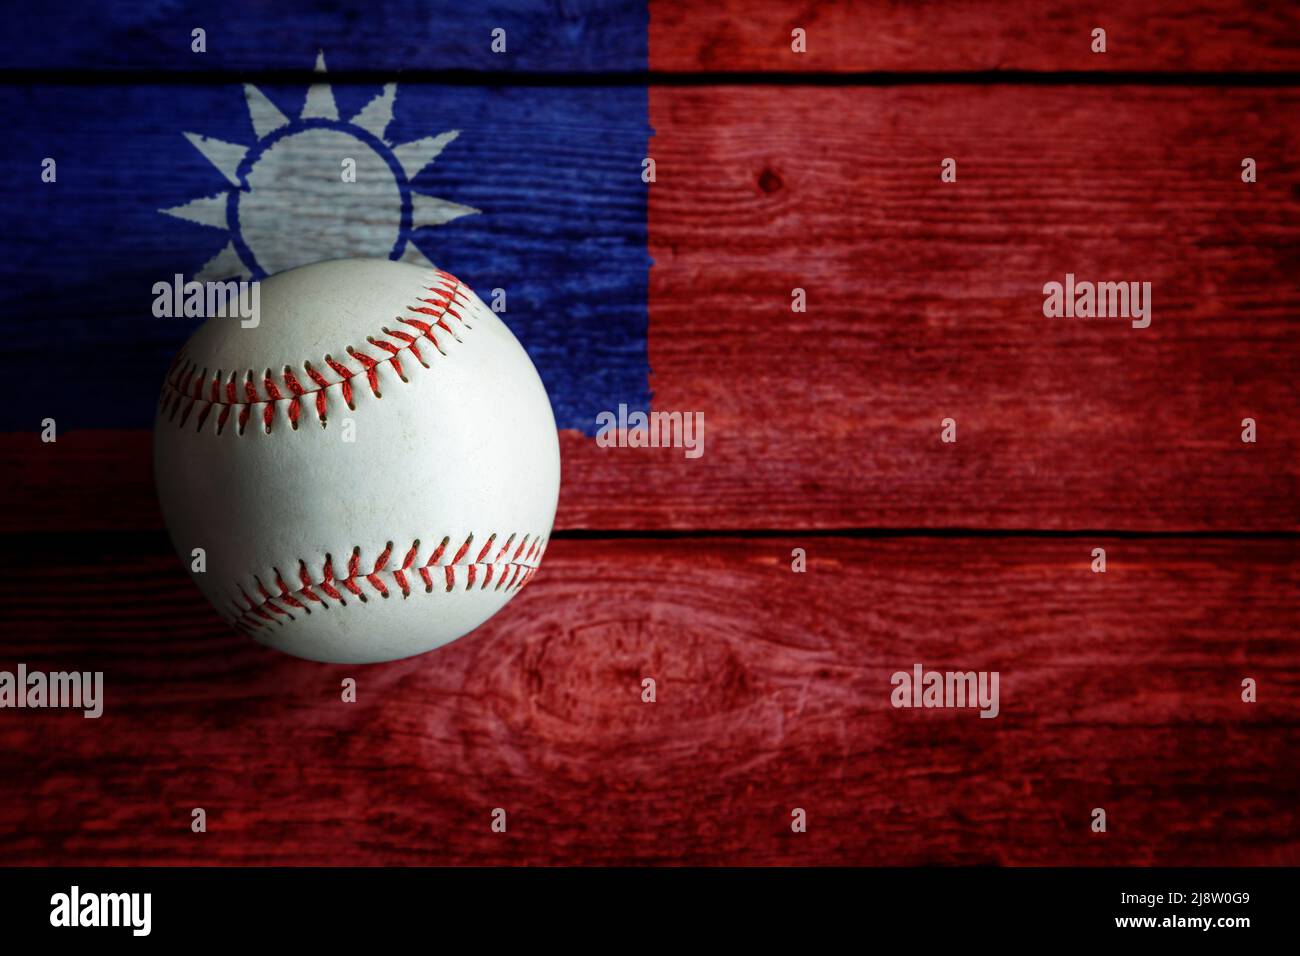 Leather baseball on rustic wooden background painted with Taiwanese flag with copy space. Taiwan or Chinese Taipei is one of the top baseball nations Stock Photo